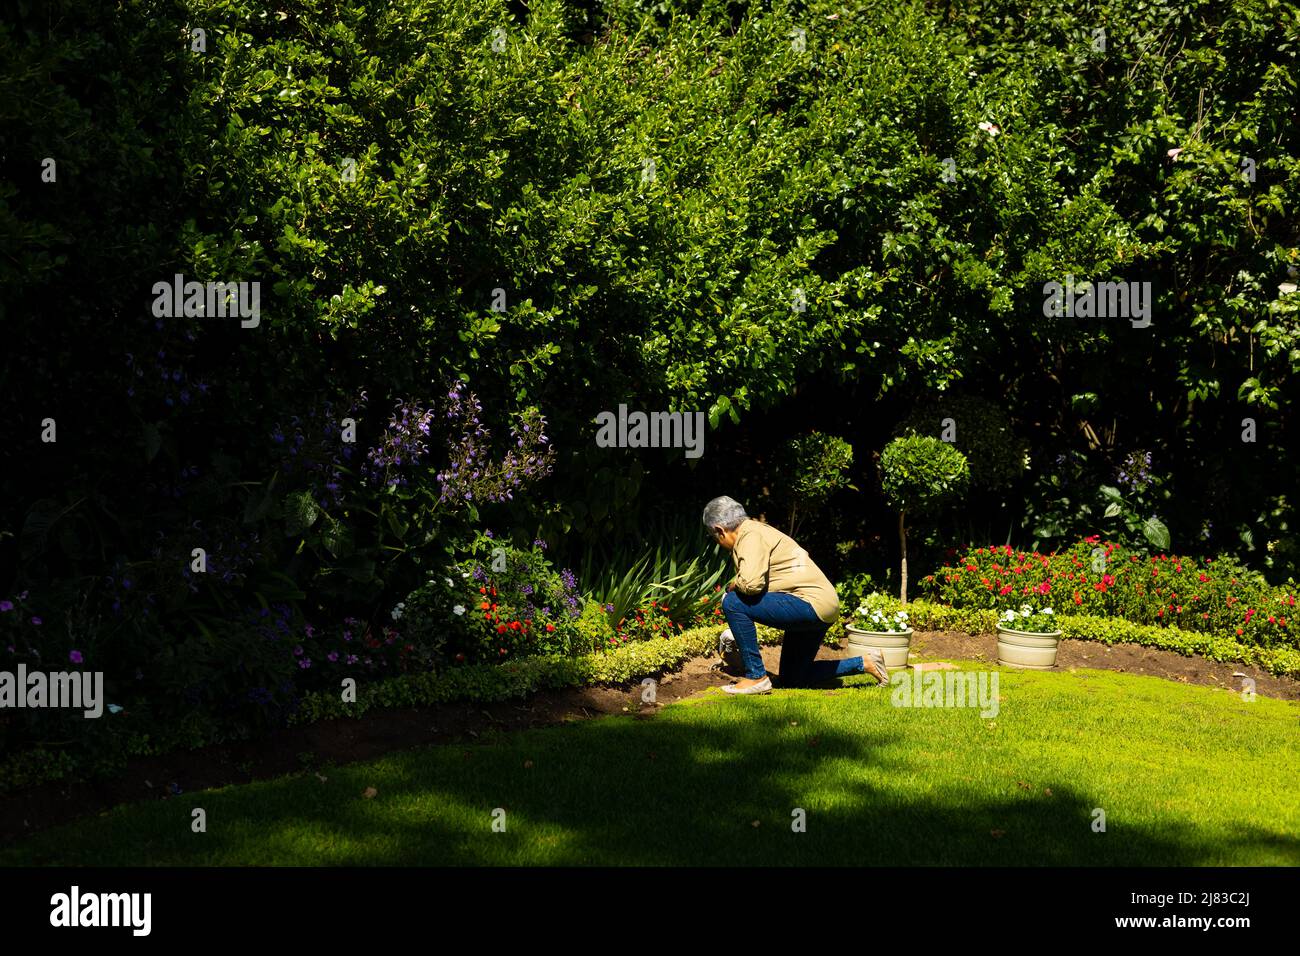 Side view of biracial senior woman with short hair gardening while kneeling on grassy land in yard Stock Photo